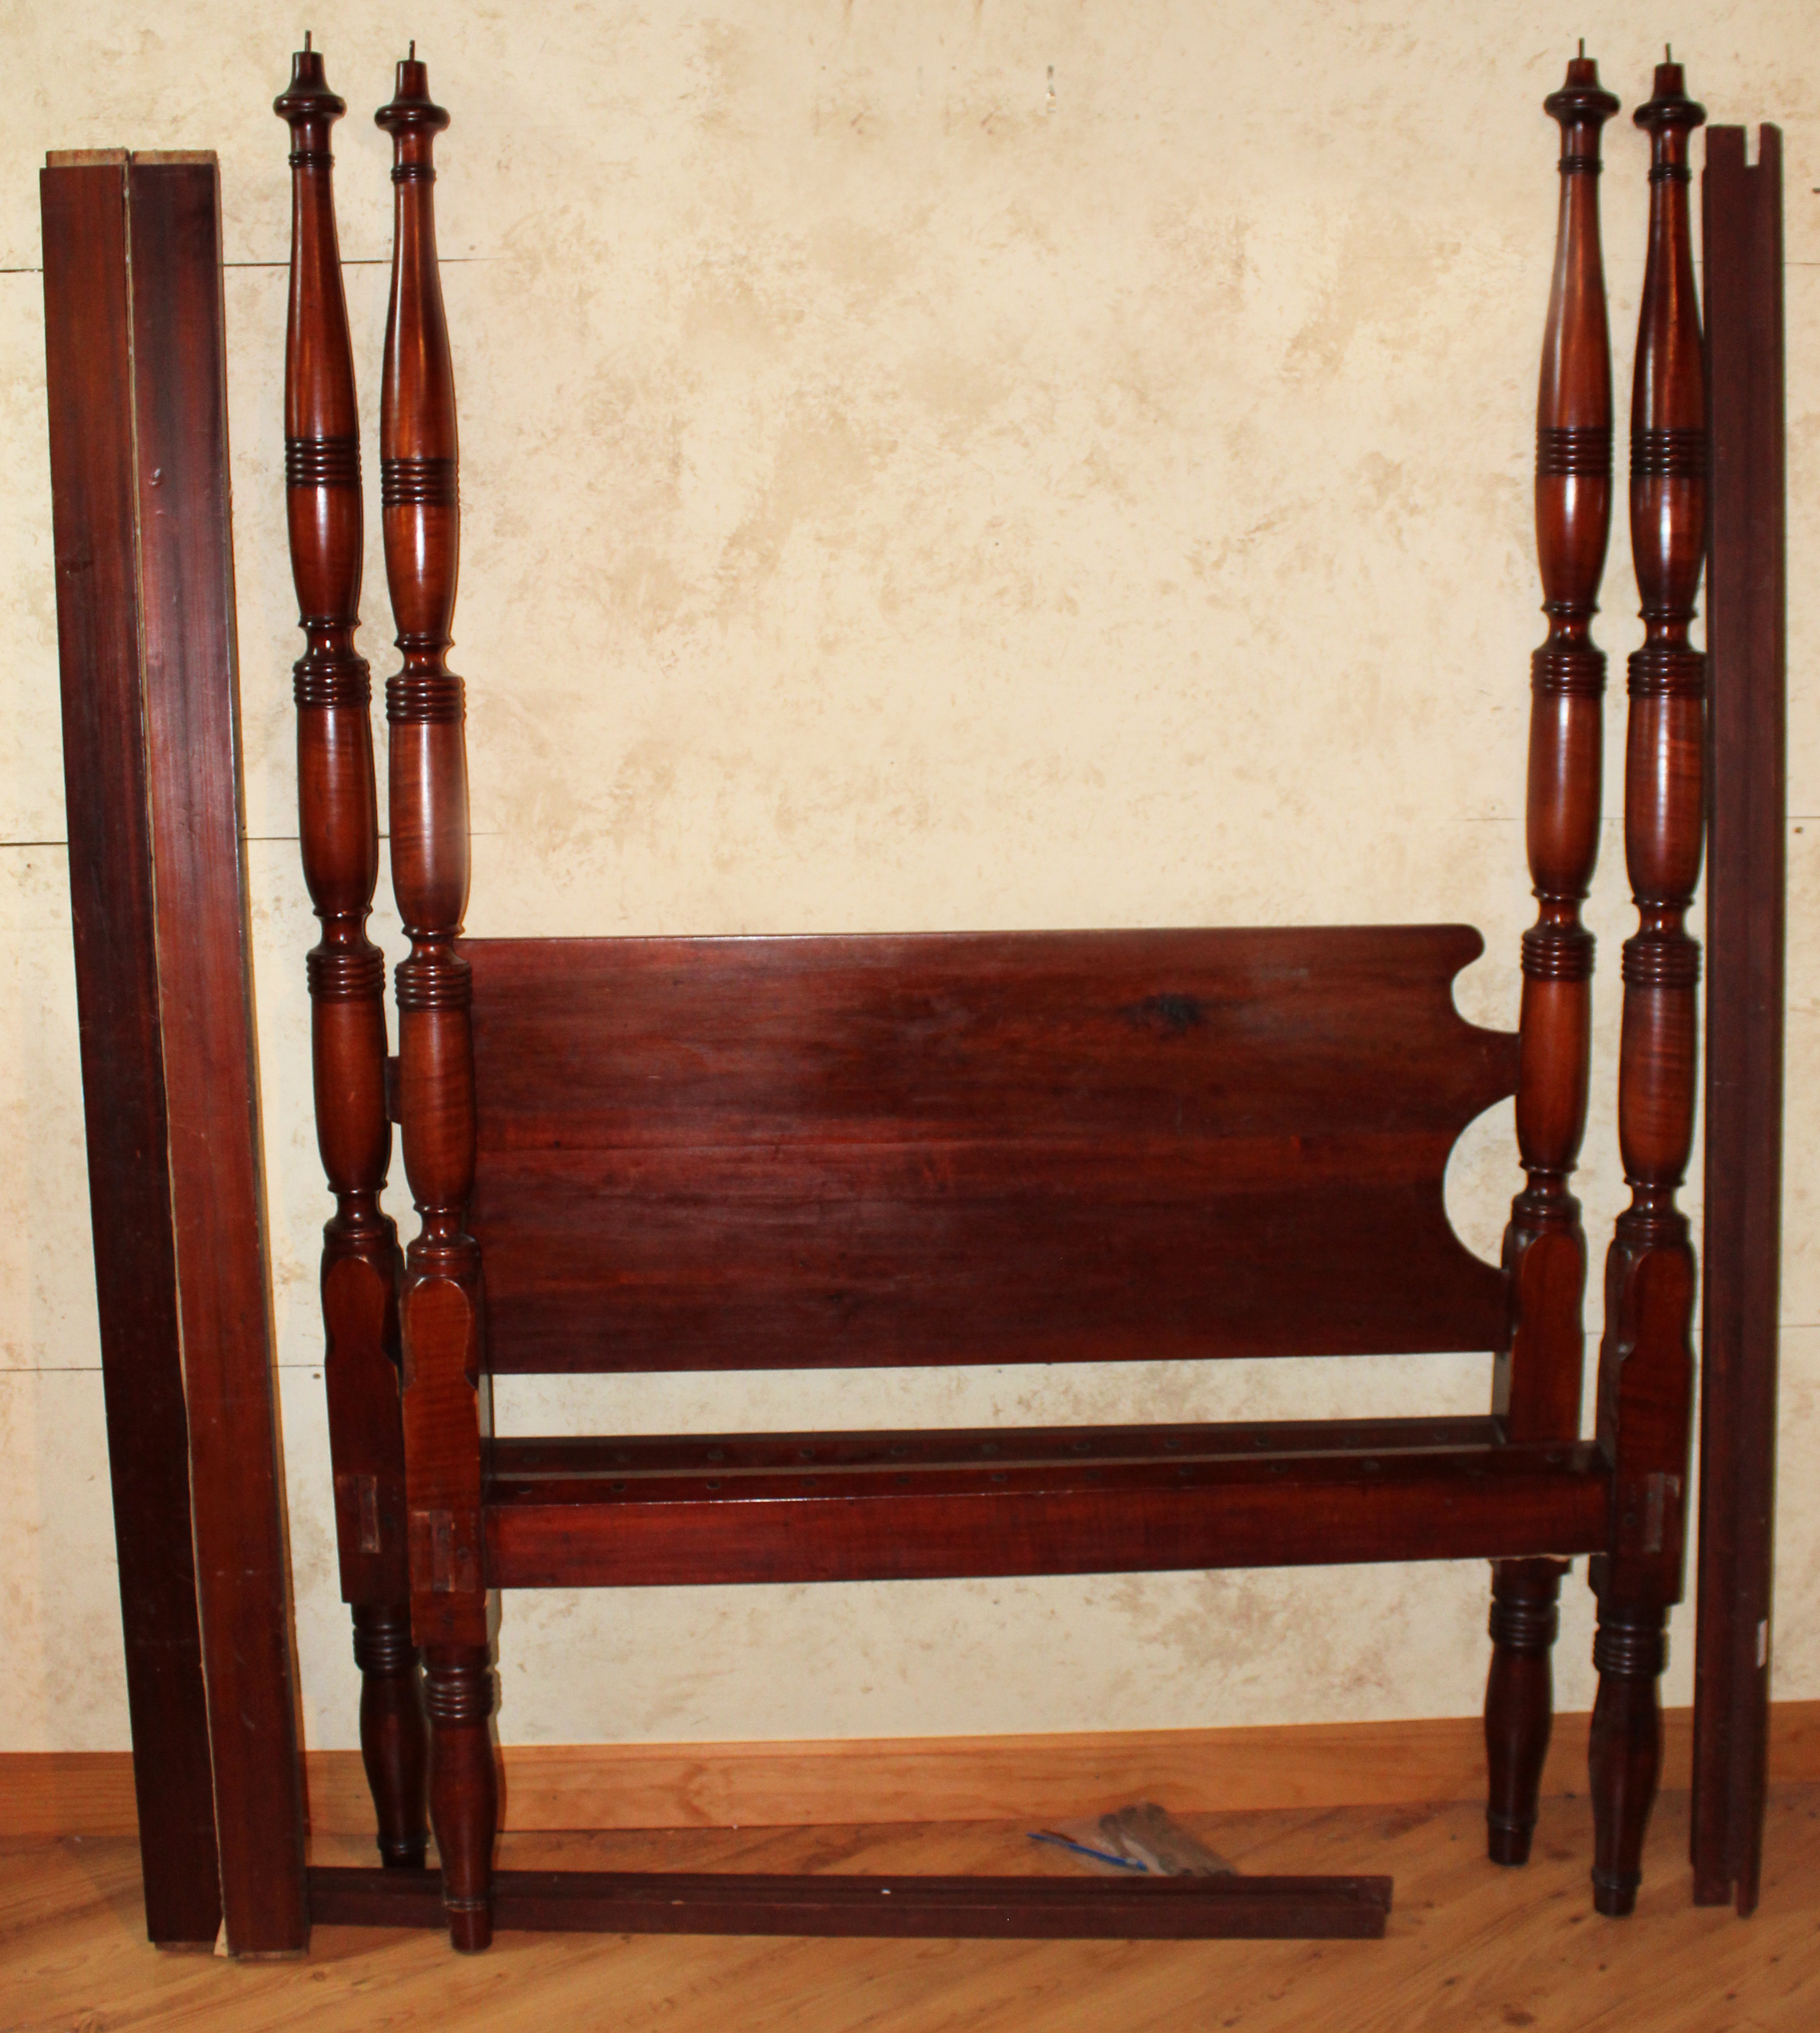 EARLY AMERICAN CHERRY POSTER BED, 19TH